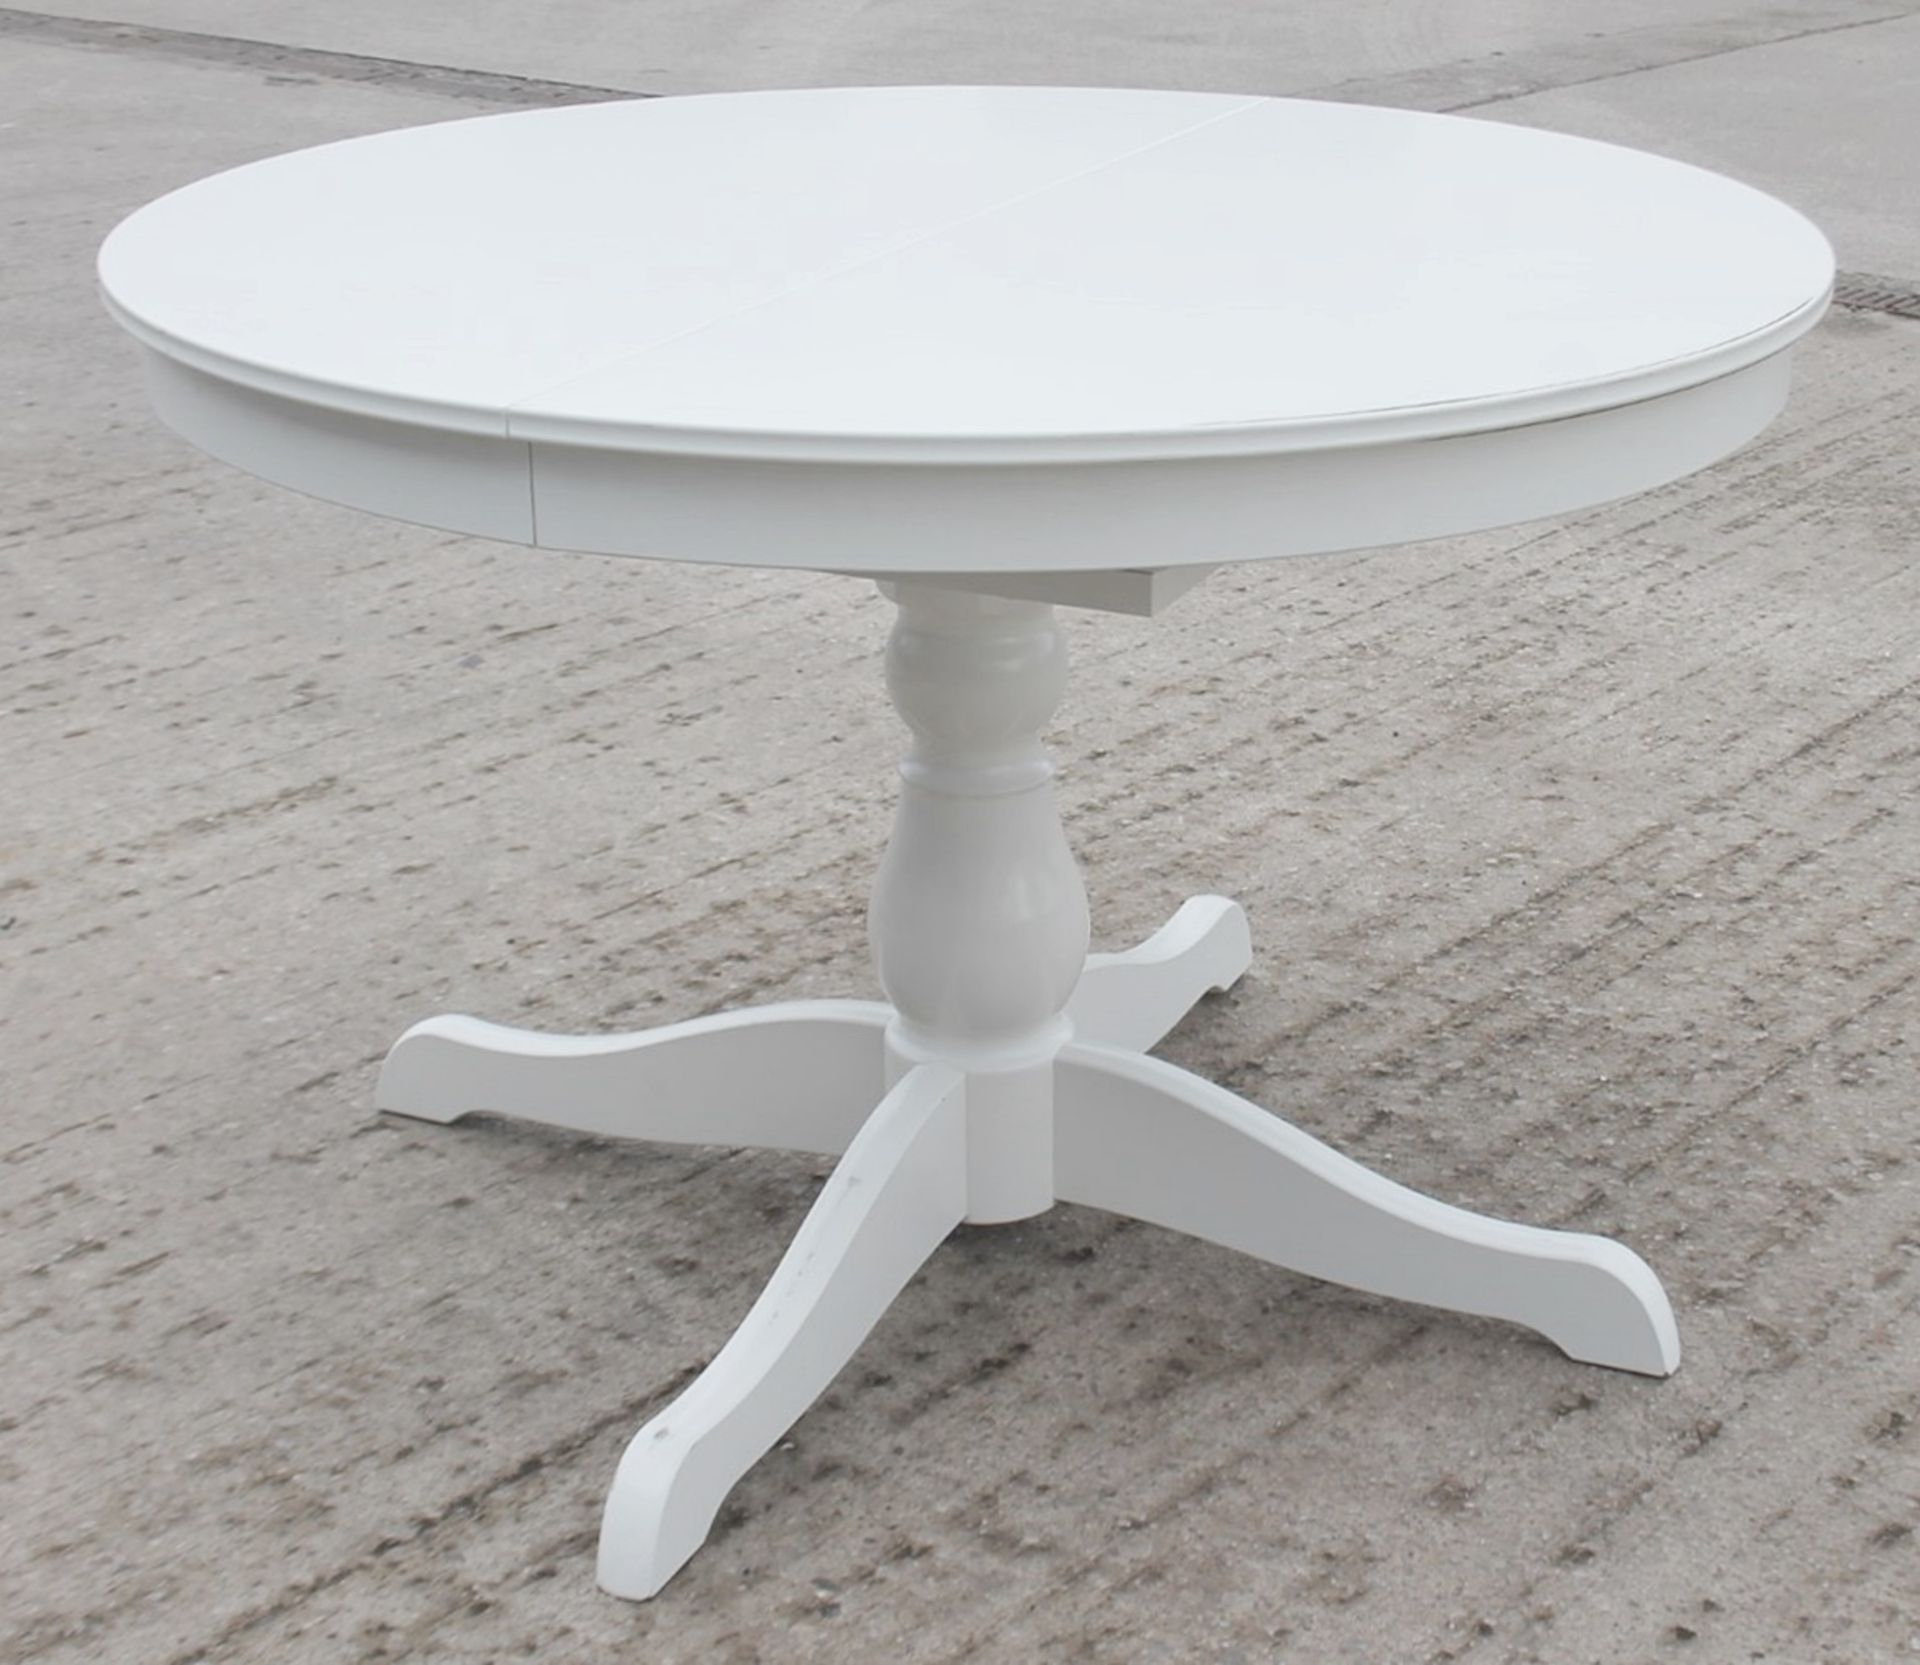 1 x Round Extending Wooden Table In White - Recently Relocated From An Exclusive Property - Ref: